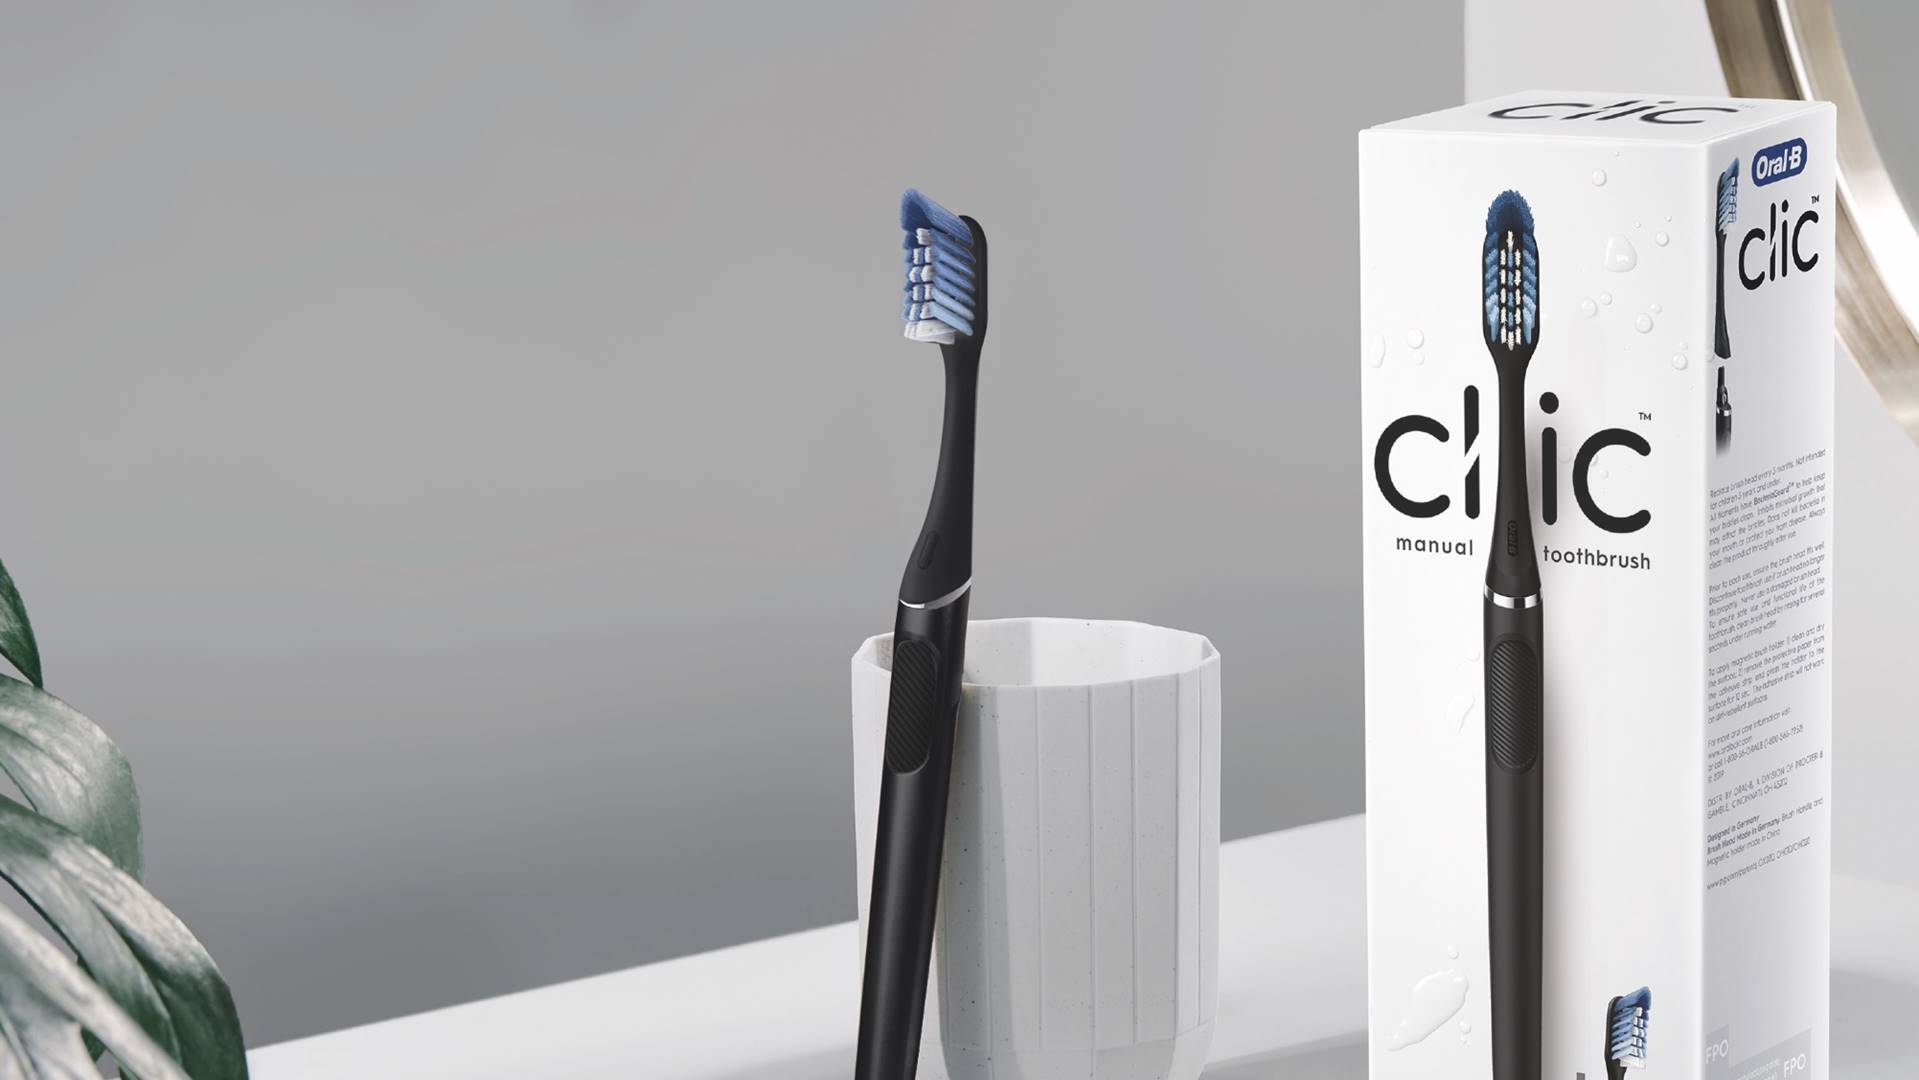 Oral B click toothbrush